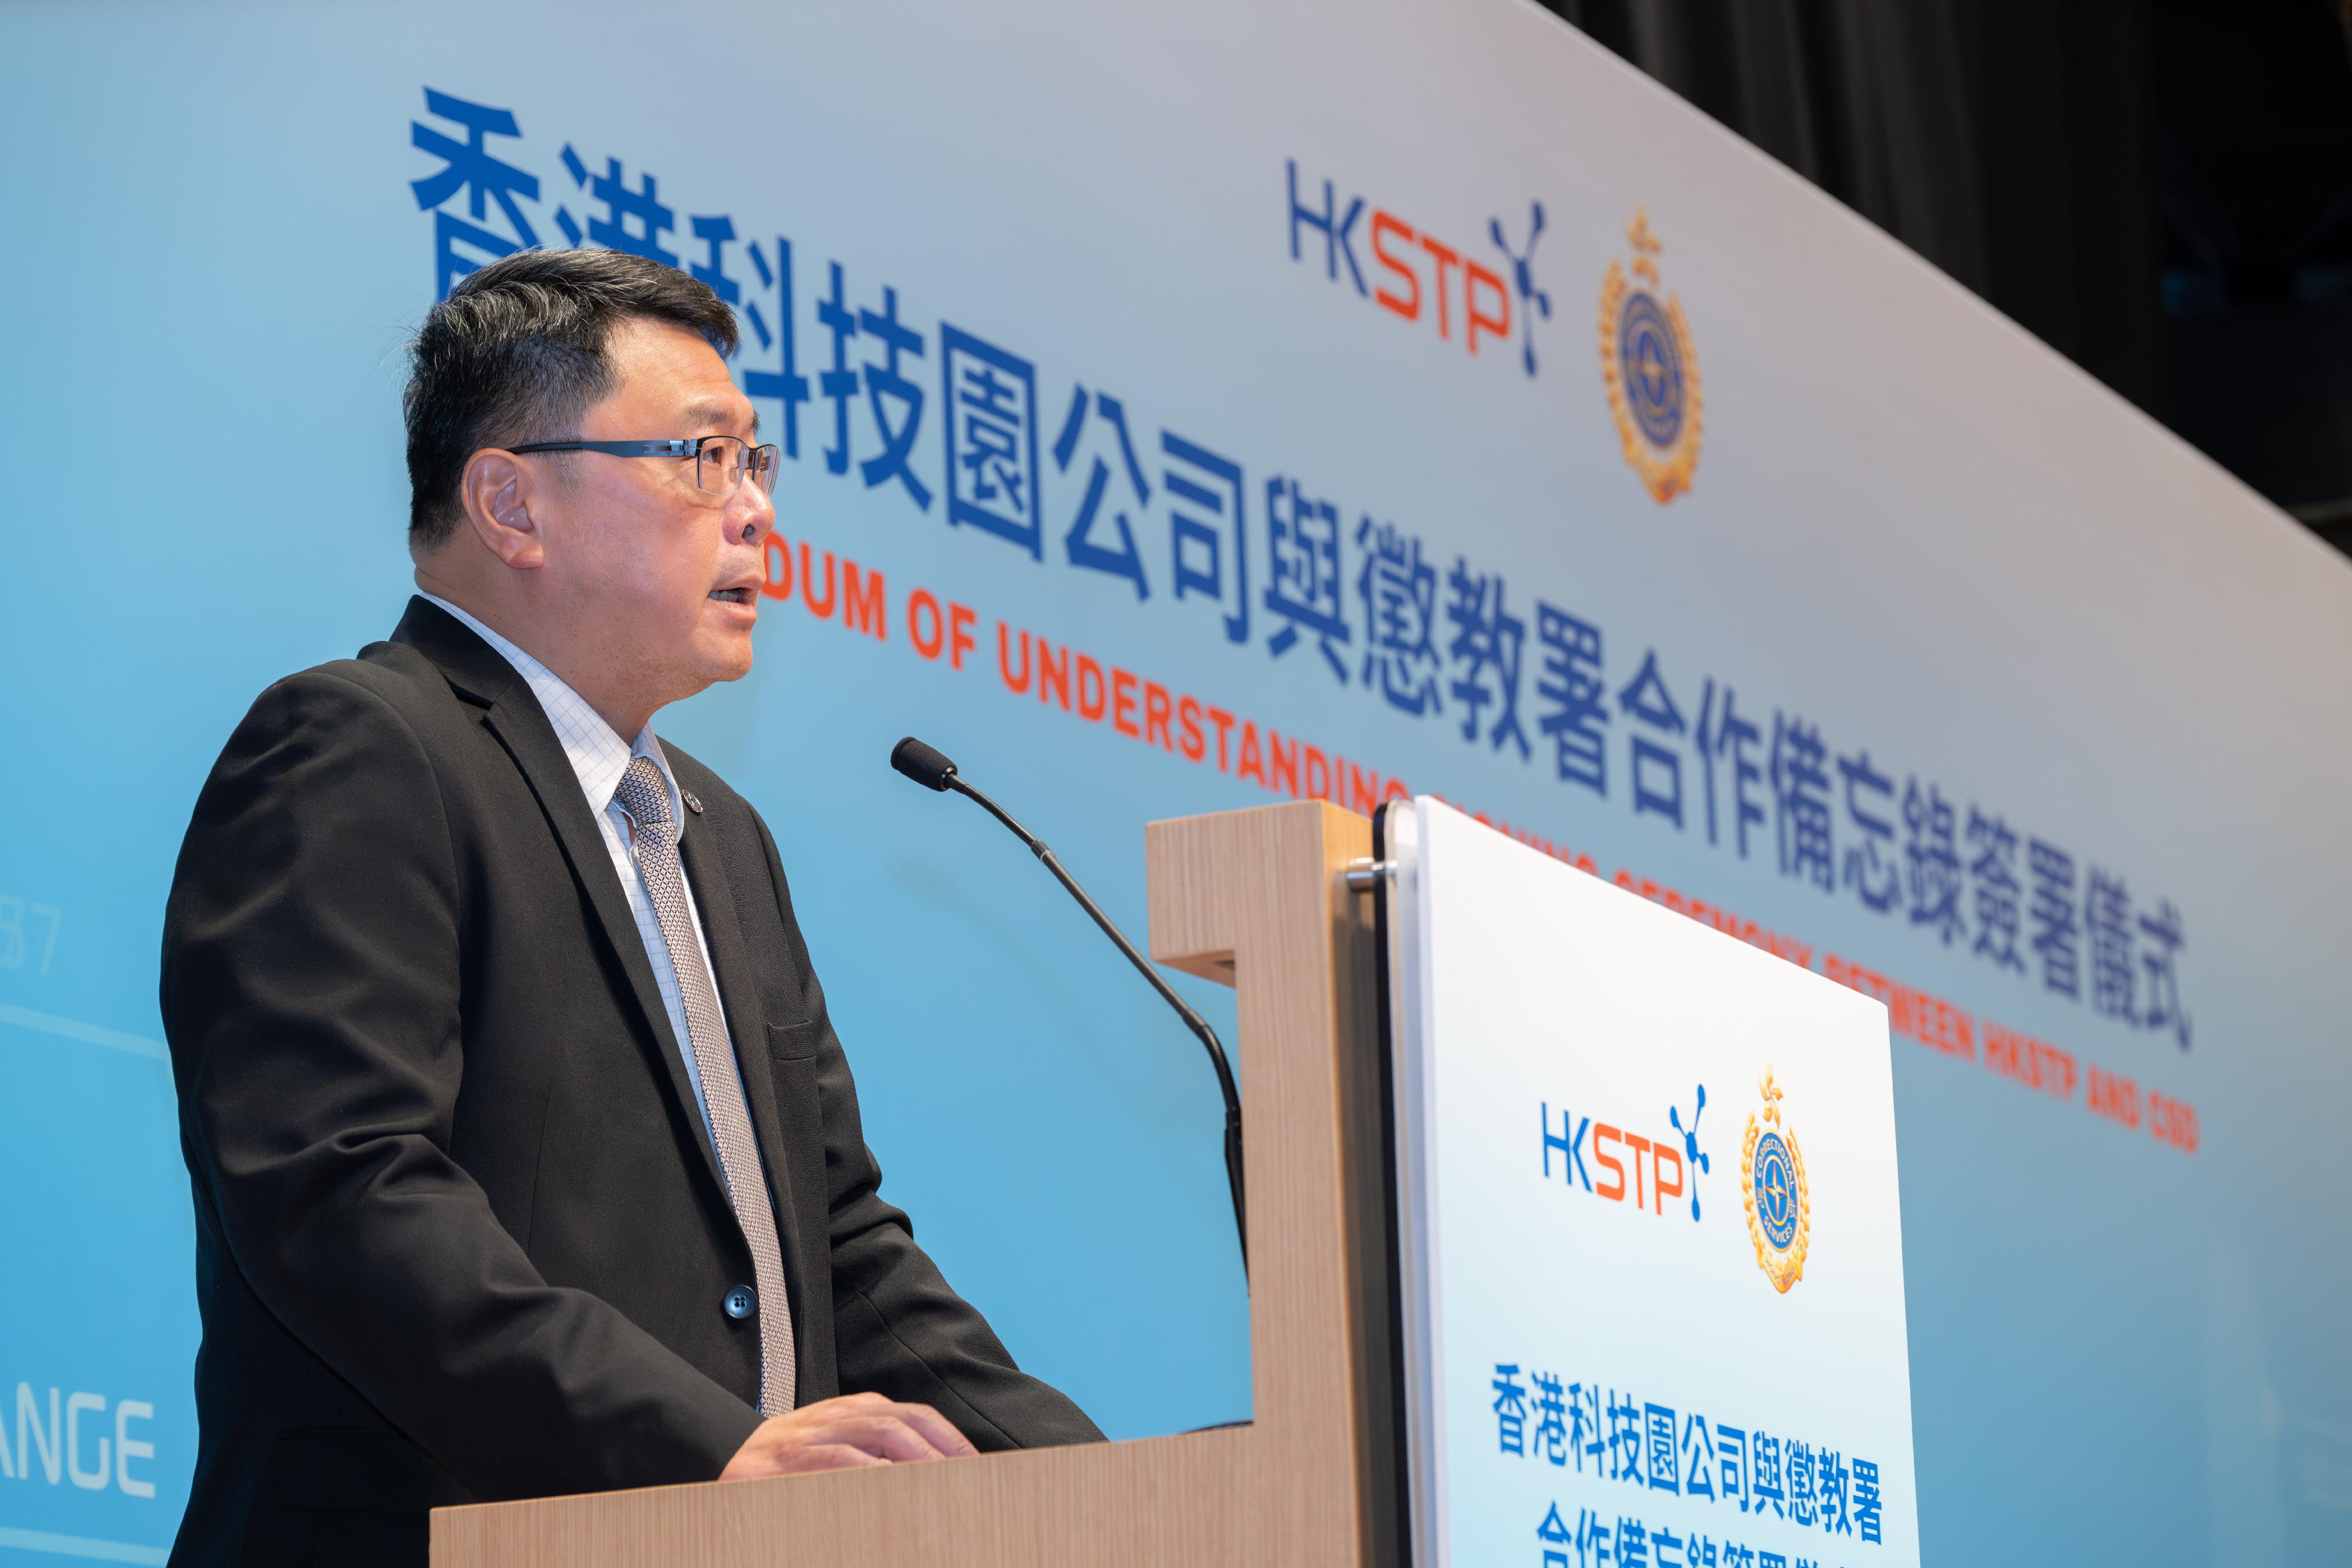 The Correctional Services Department and the Hong Kong Science and Technology Parks Corporation (HKSTP) signed a Memorandum of Understanding today (July 11) to deepen their co-operation, which will inject new impetus into the sustainable development of “Smart Prison”. Photo shows the Chairman of the HKSTP, Dr Sunny Chai, delivering a speech at the signing ceremony.
